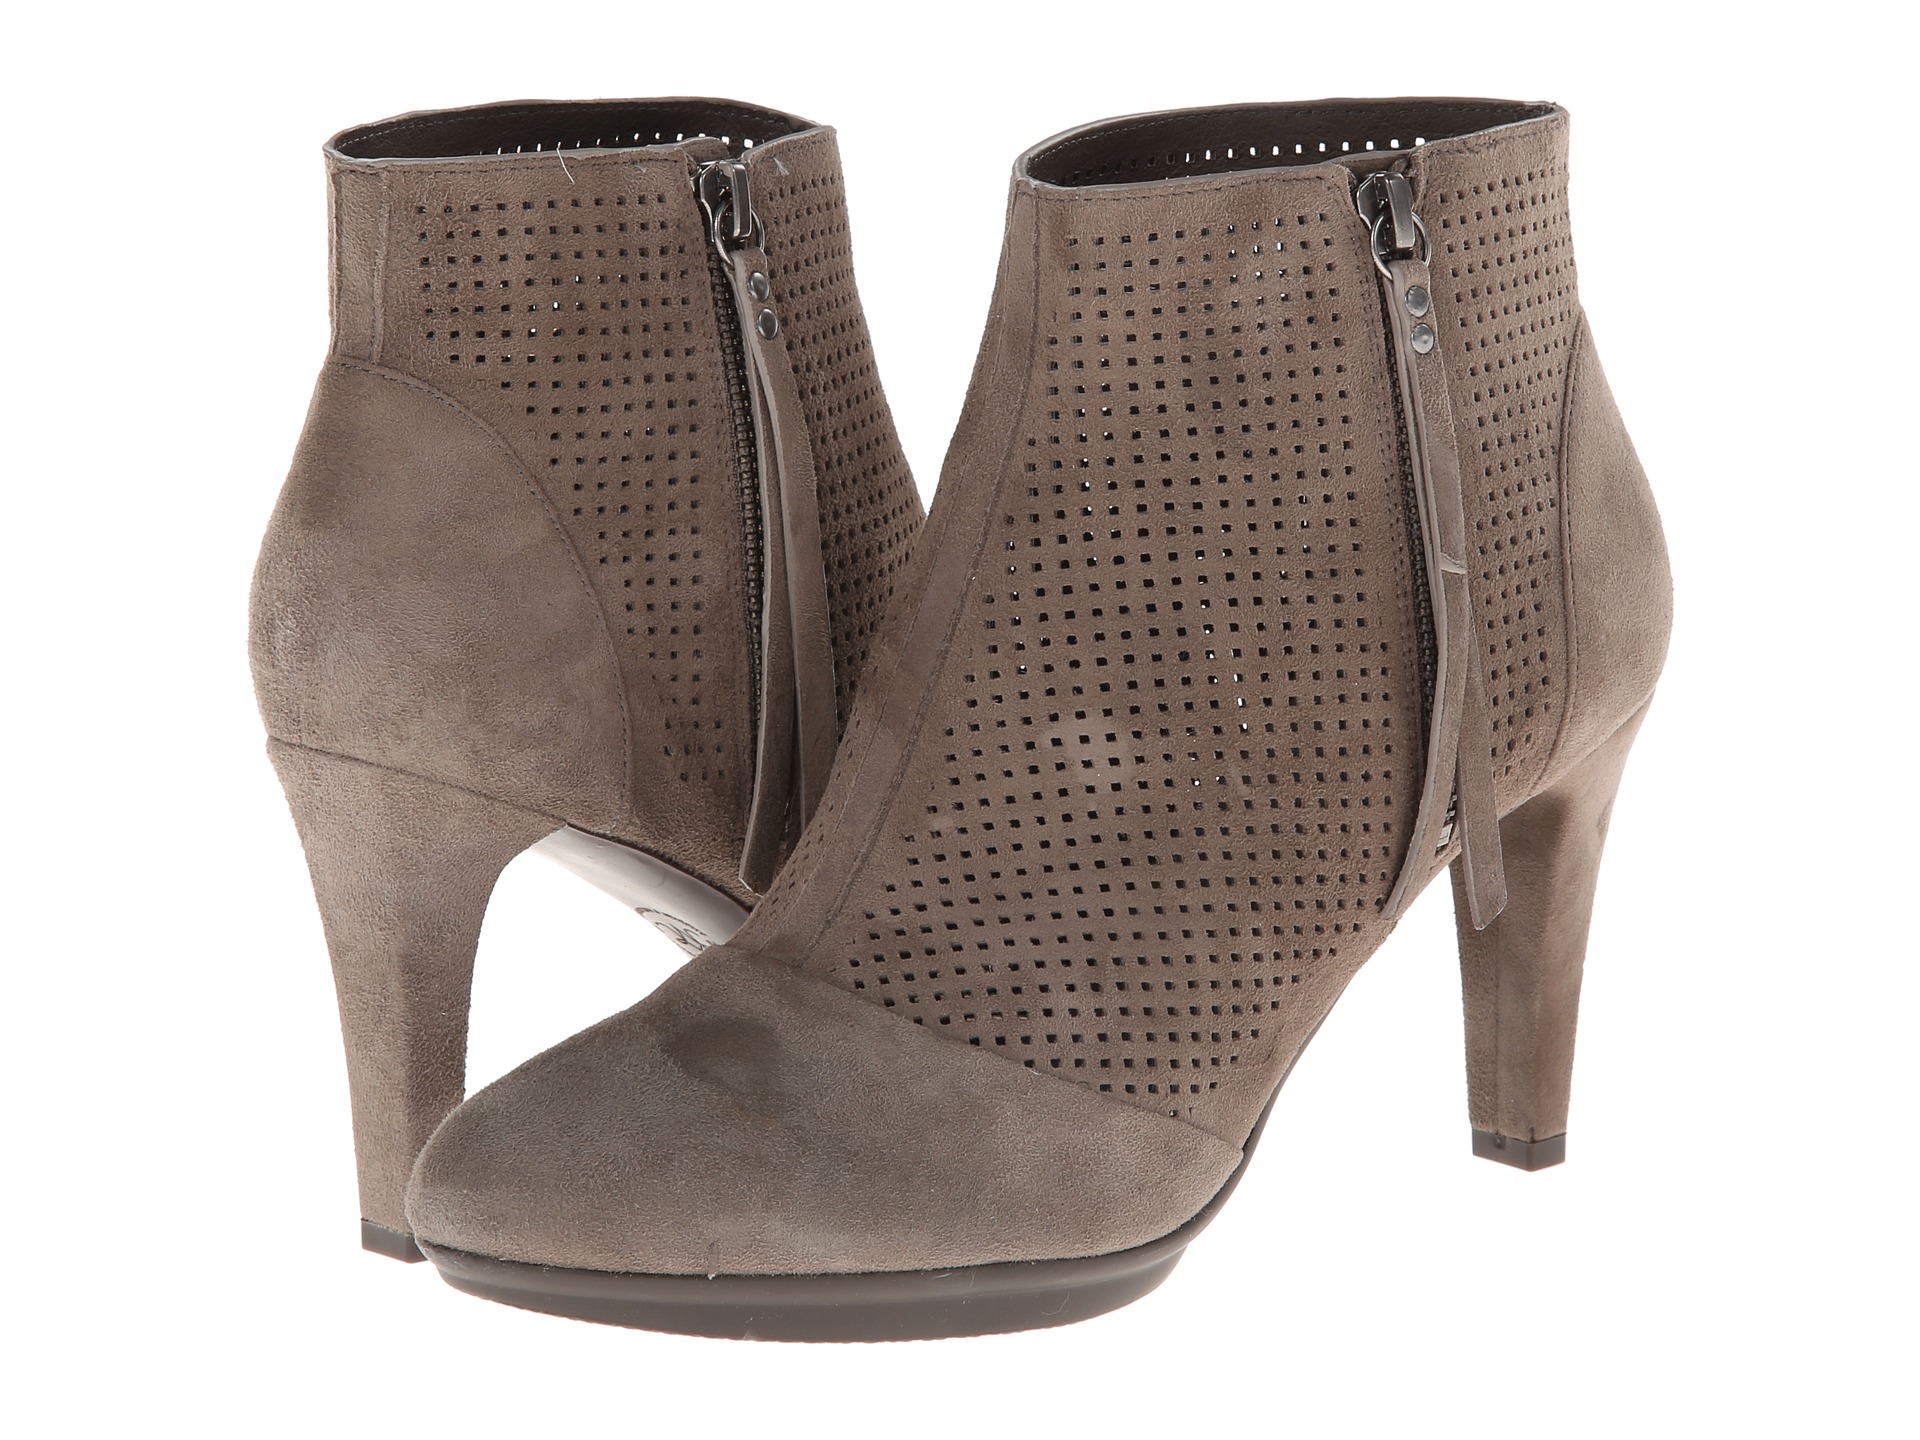 Johnston Murphy Lani Zip Bootie Fawn Suede | Shipped Free at Zappos